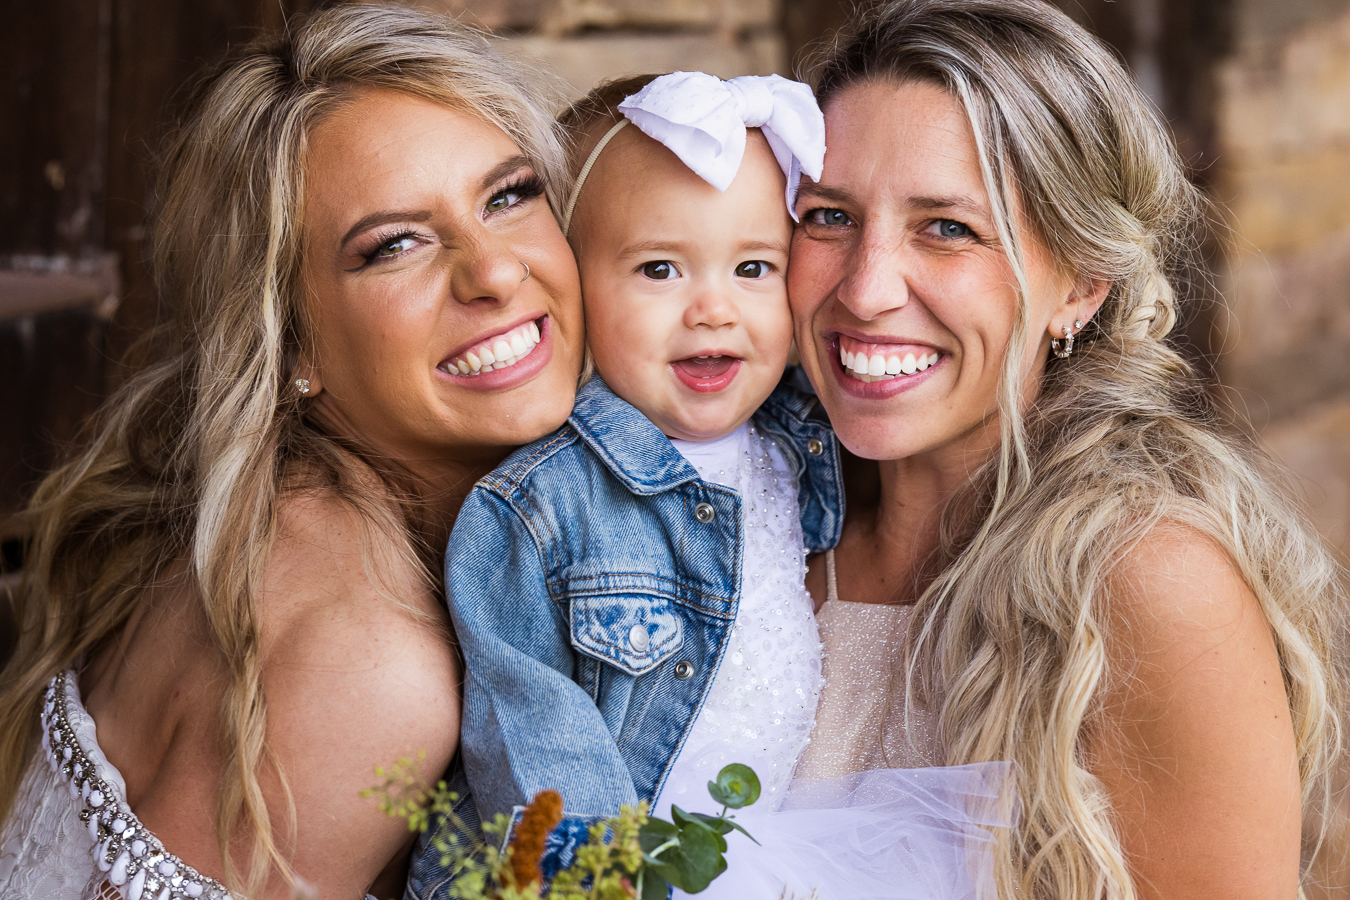 pa wedding photographer, lisa rhinehart, captures this close up portrait of the bride with the flower girl and a bridesmaid before her country barn wedding in halifax pa 